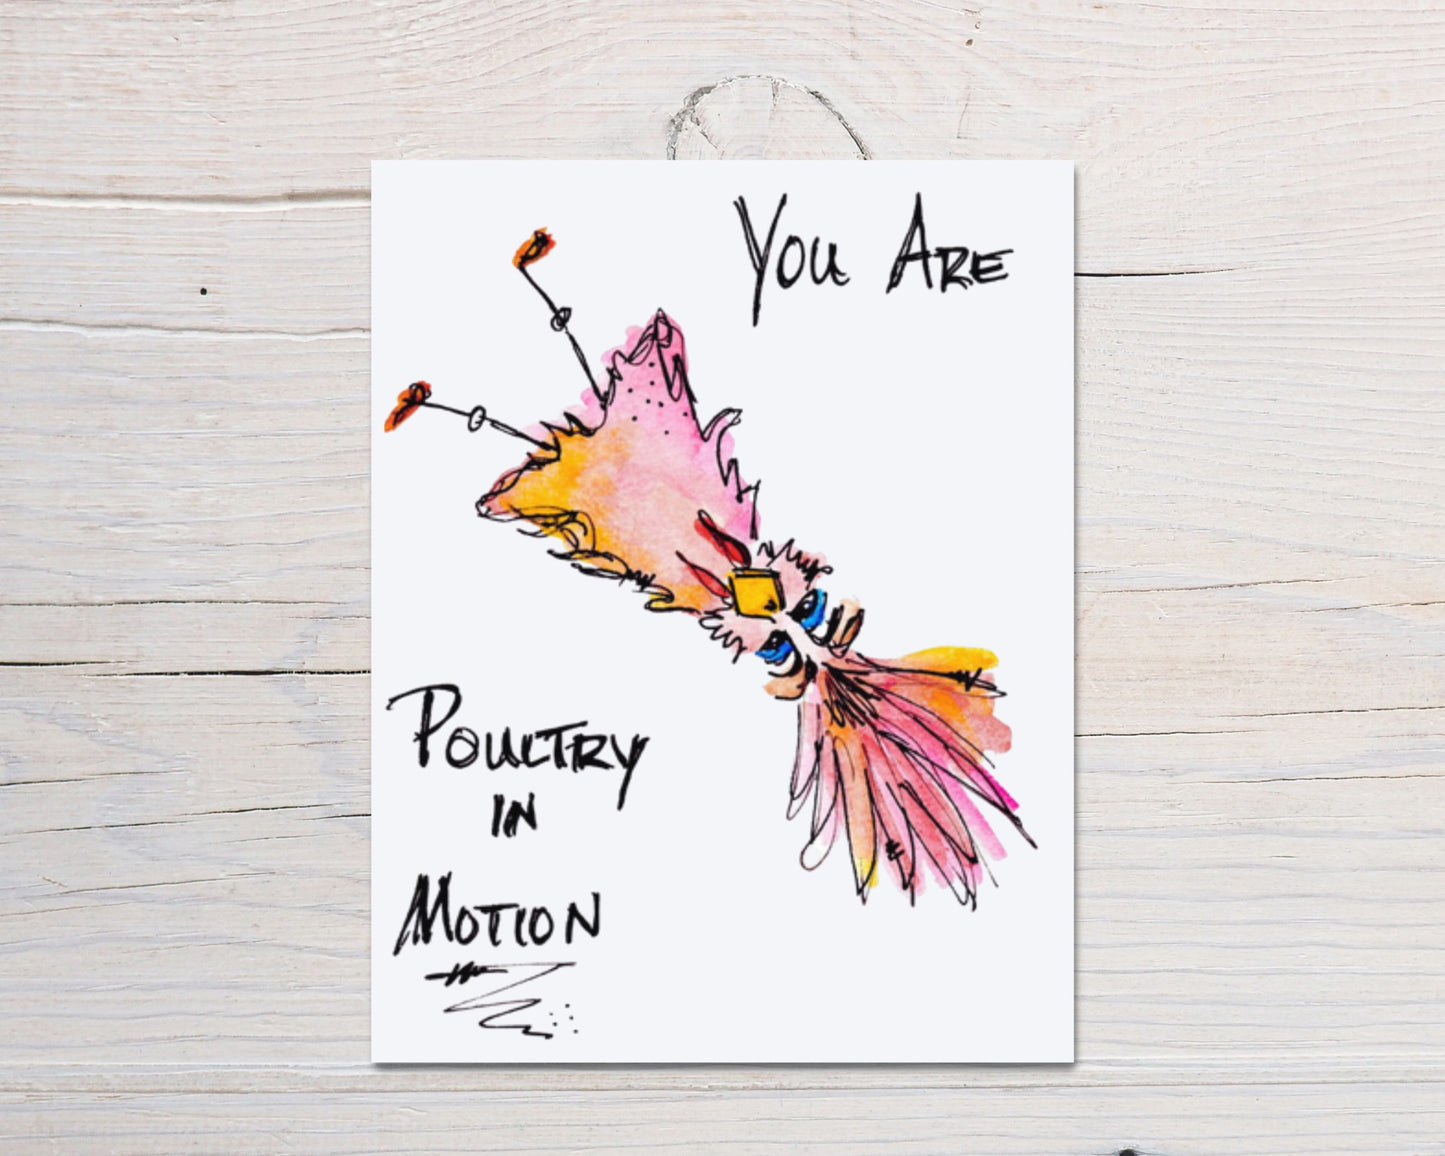 Front side of hand-drawn, hand-painted card of a colorful, whimsical watercolor upside-down bird with the works "You Are Poultry In Motion" surrounding the moving bird, on a white washed wood background